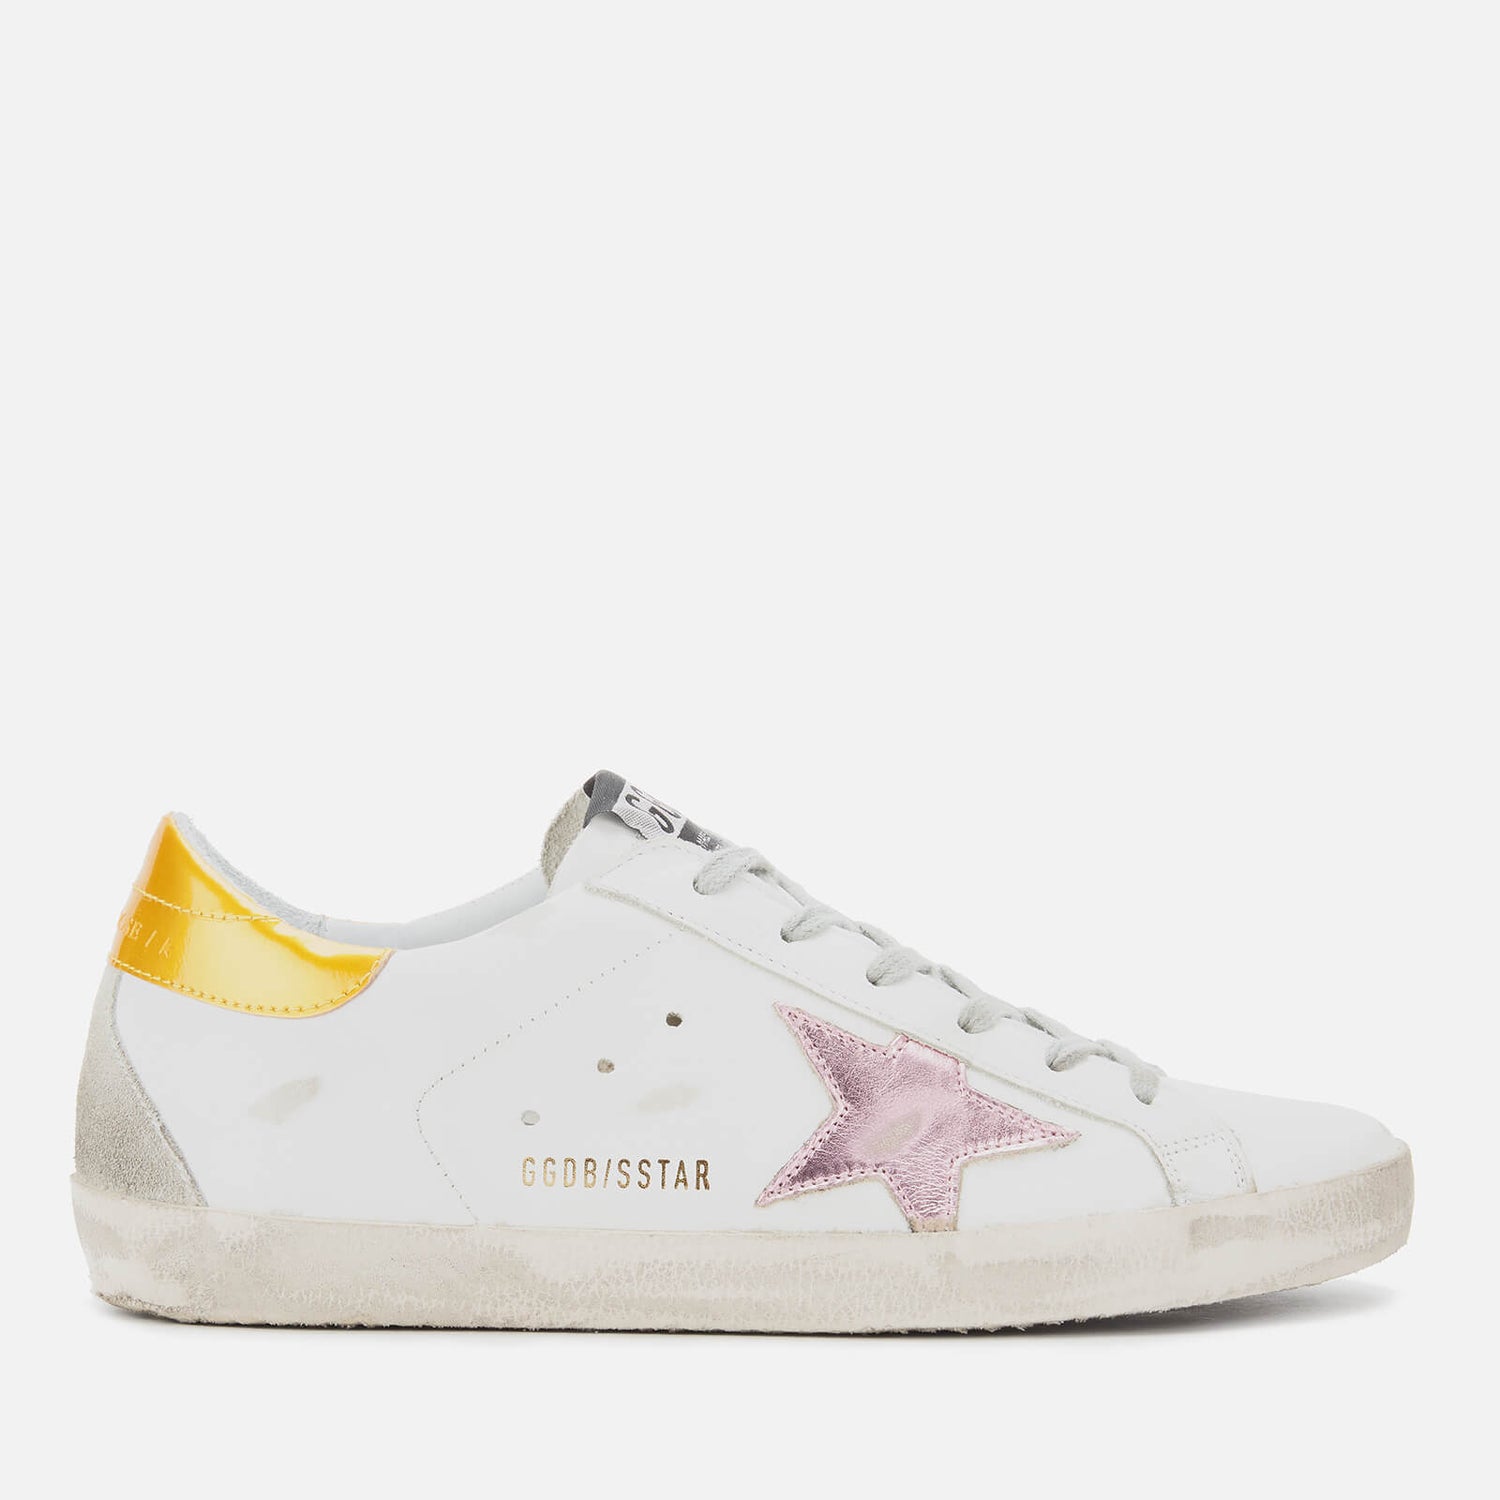 Golden Goose Women's Superstar Trainers - White Leather/Gold Pink Metallic Star - UK 8